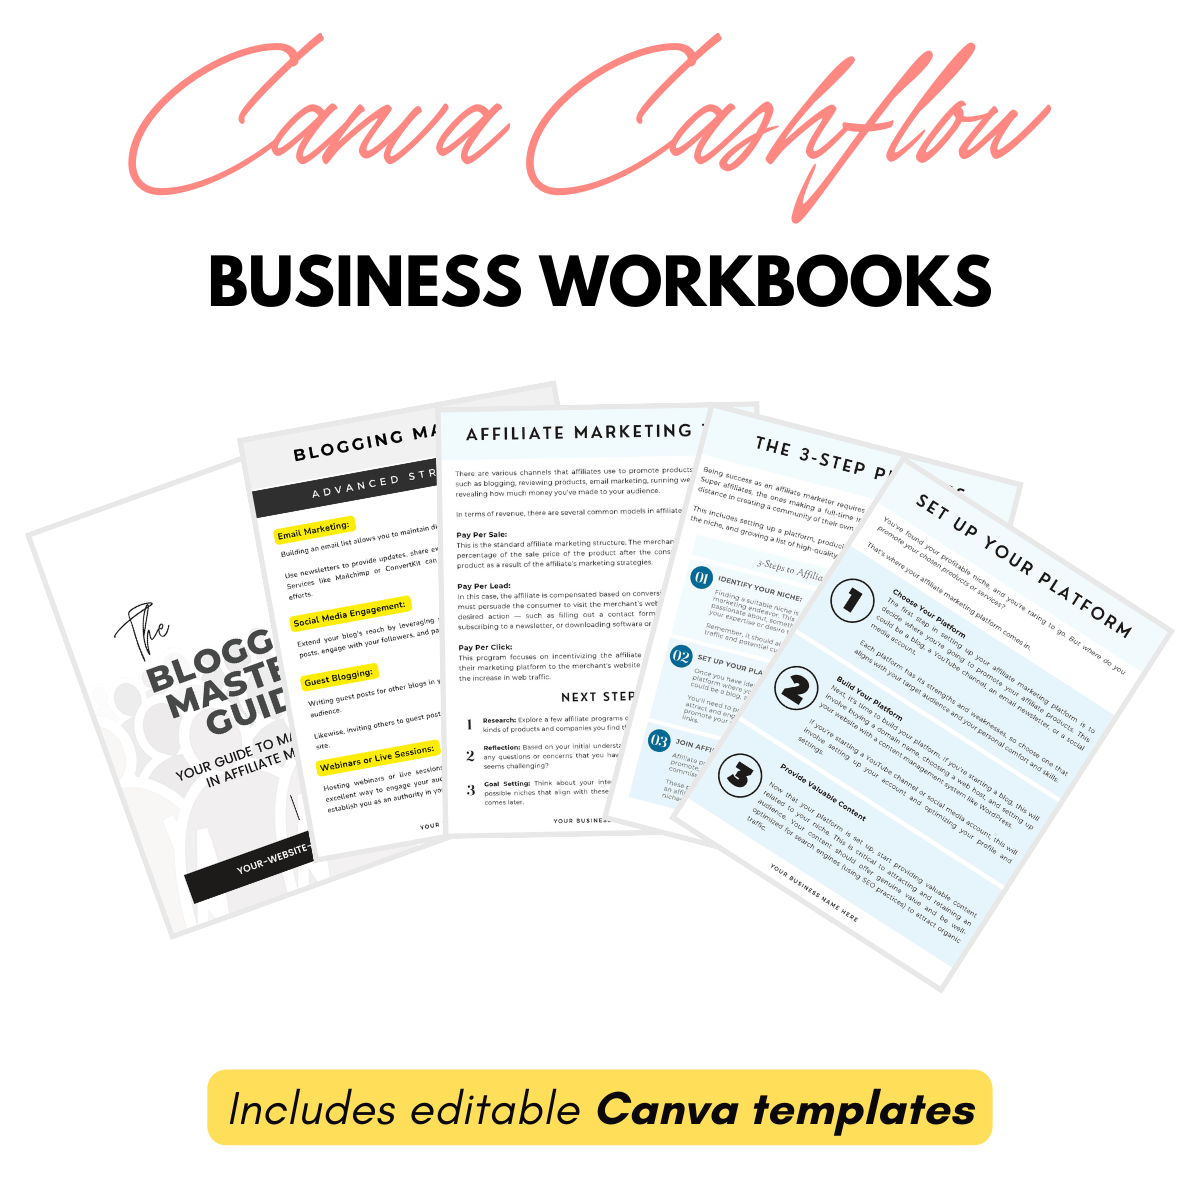 Canva Cashflow: Work From Home Series